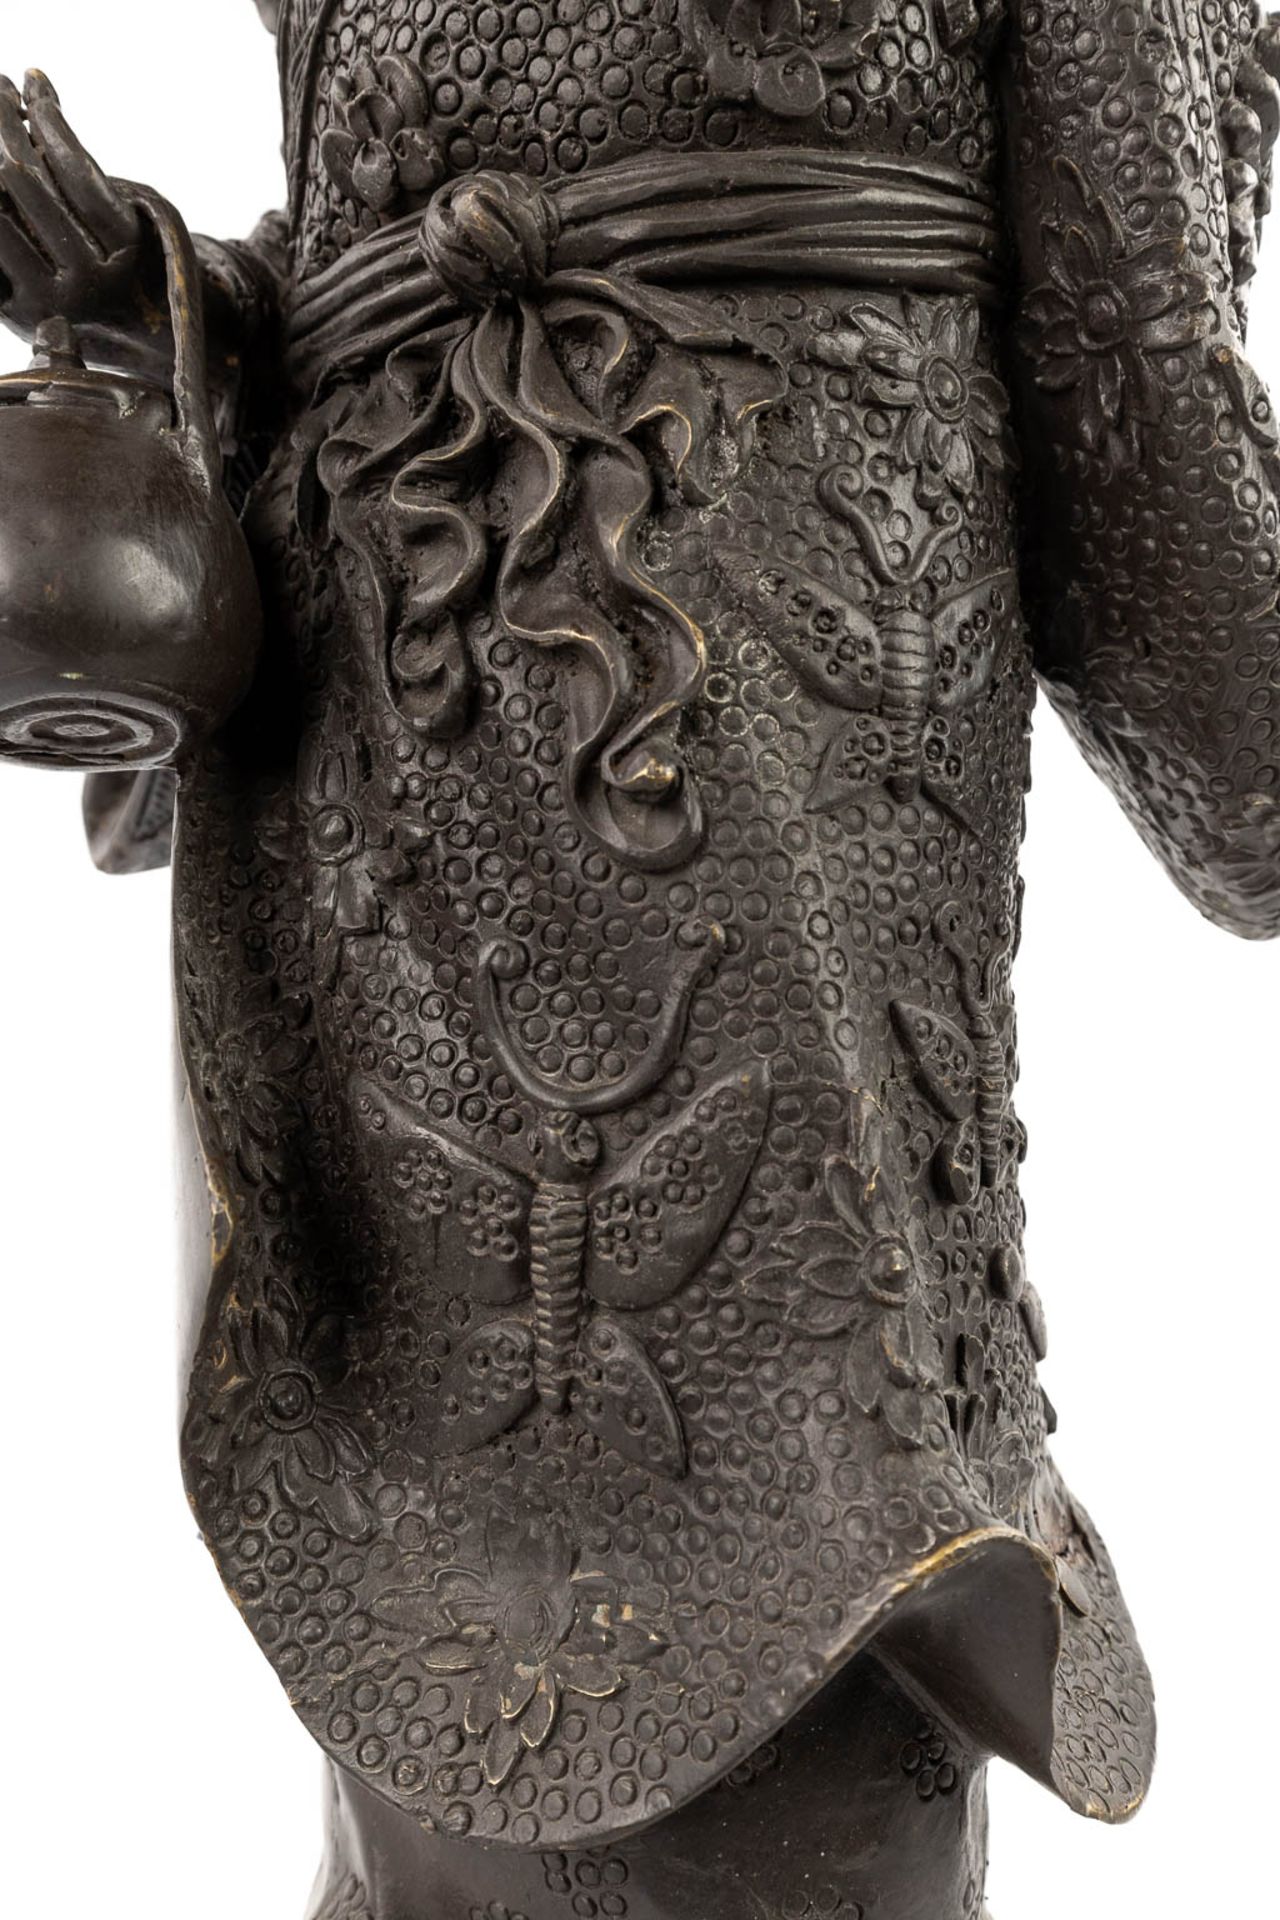 A Japanese Okimono of a mother with child, patinated bronze. 20th C. (D:18 x W:22 x H:59 cm) - Image 10 of 16